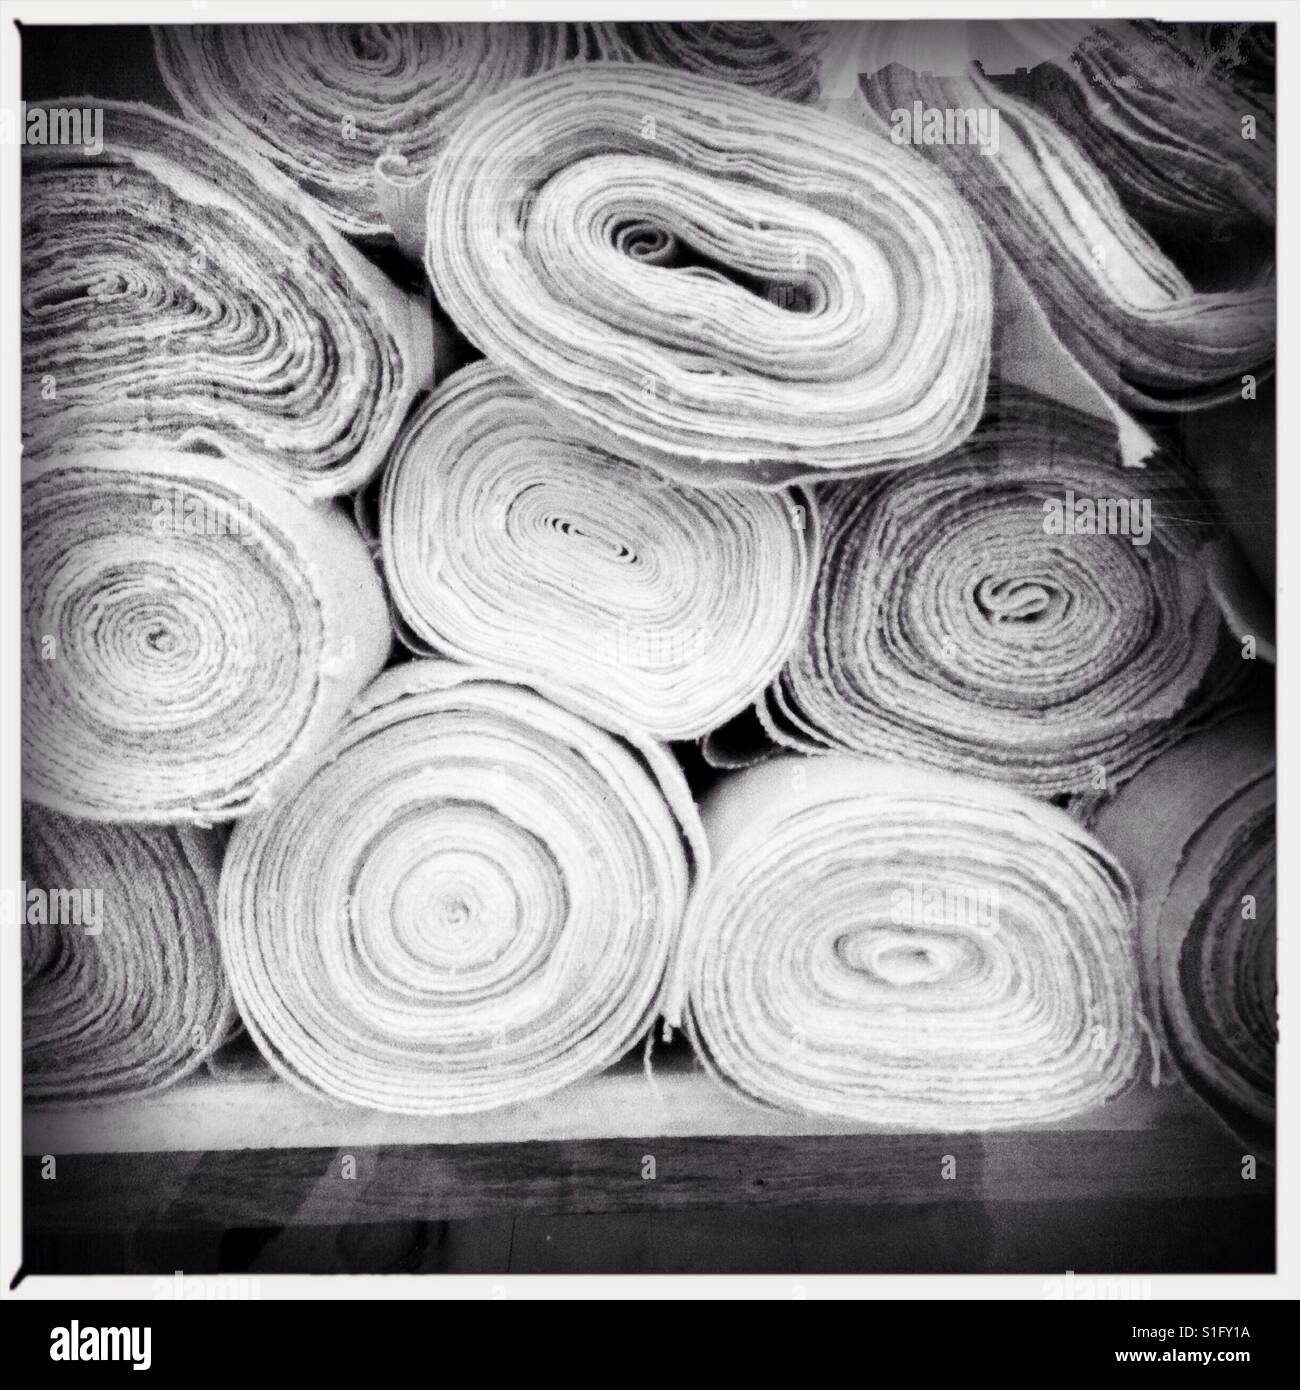 side view of rolls of antique fabric rolled on a pile Stock Photo